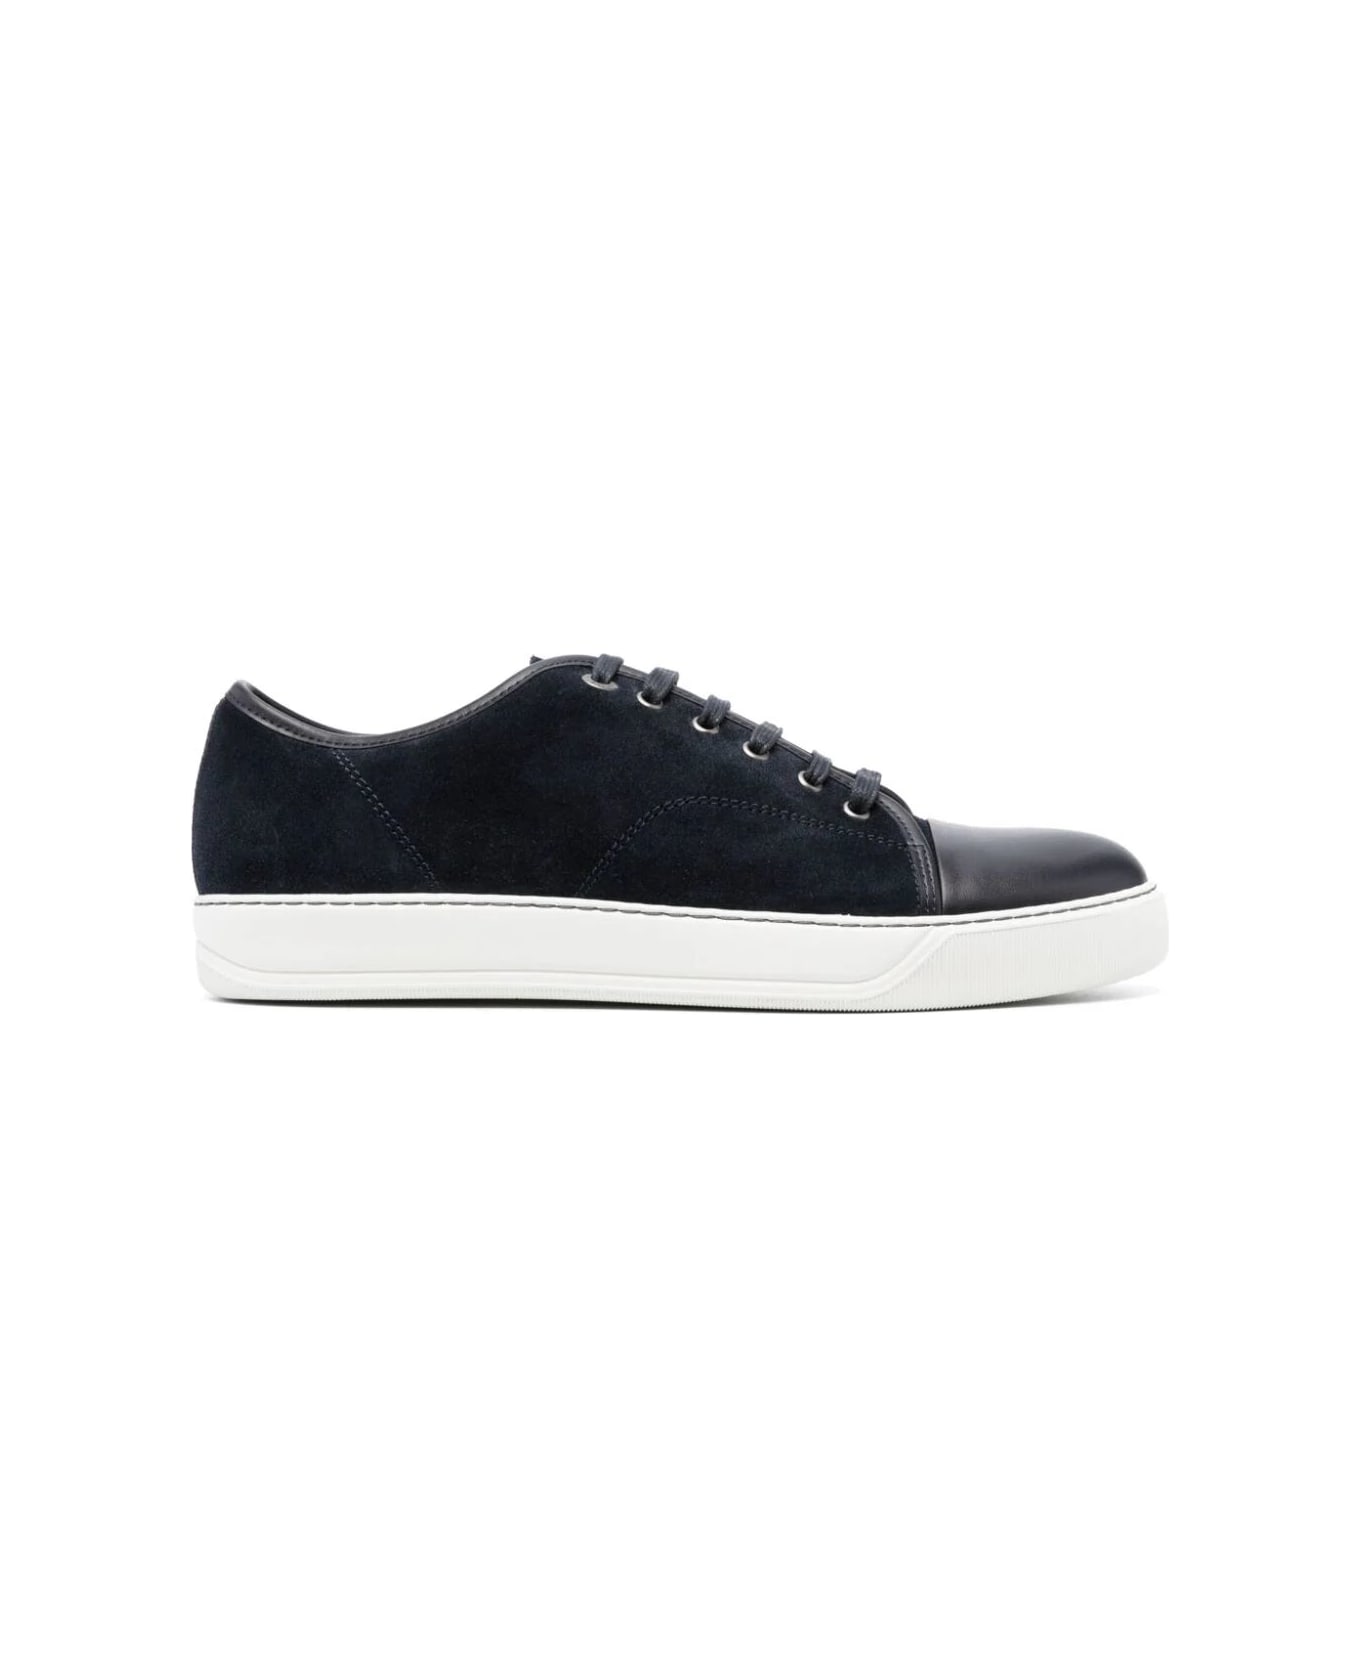 Lanvin Suede And Nappa Captoe Low To Sneaker - Navy Blue スニーカー